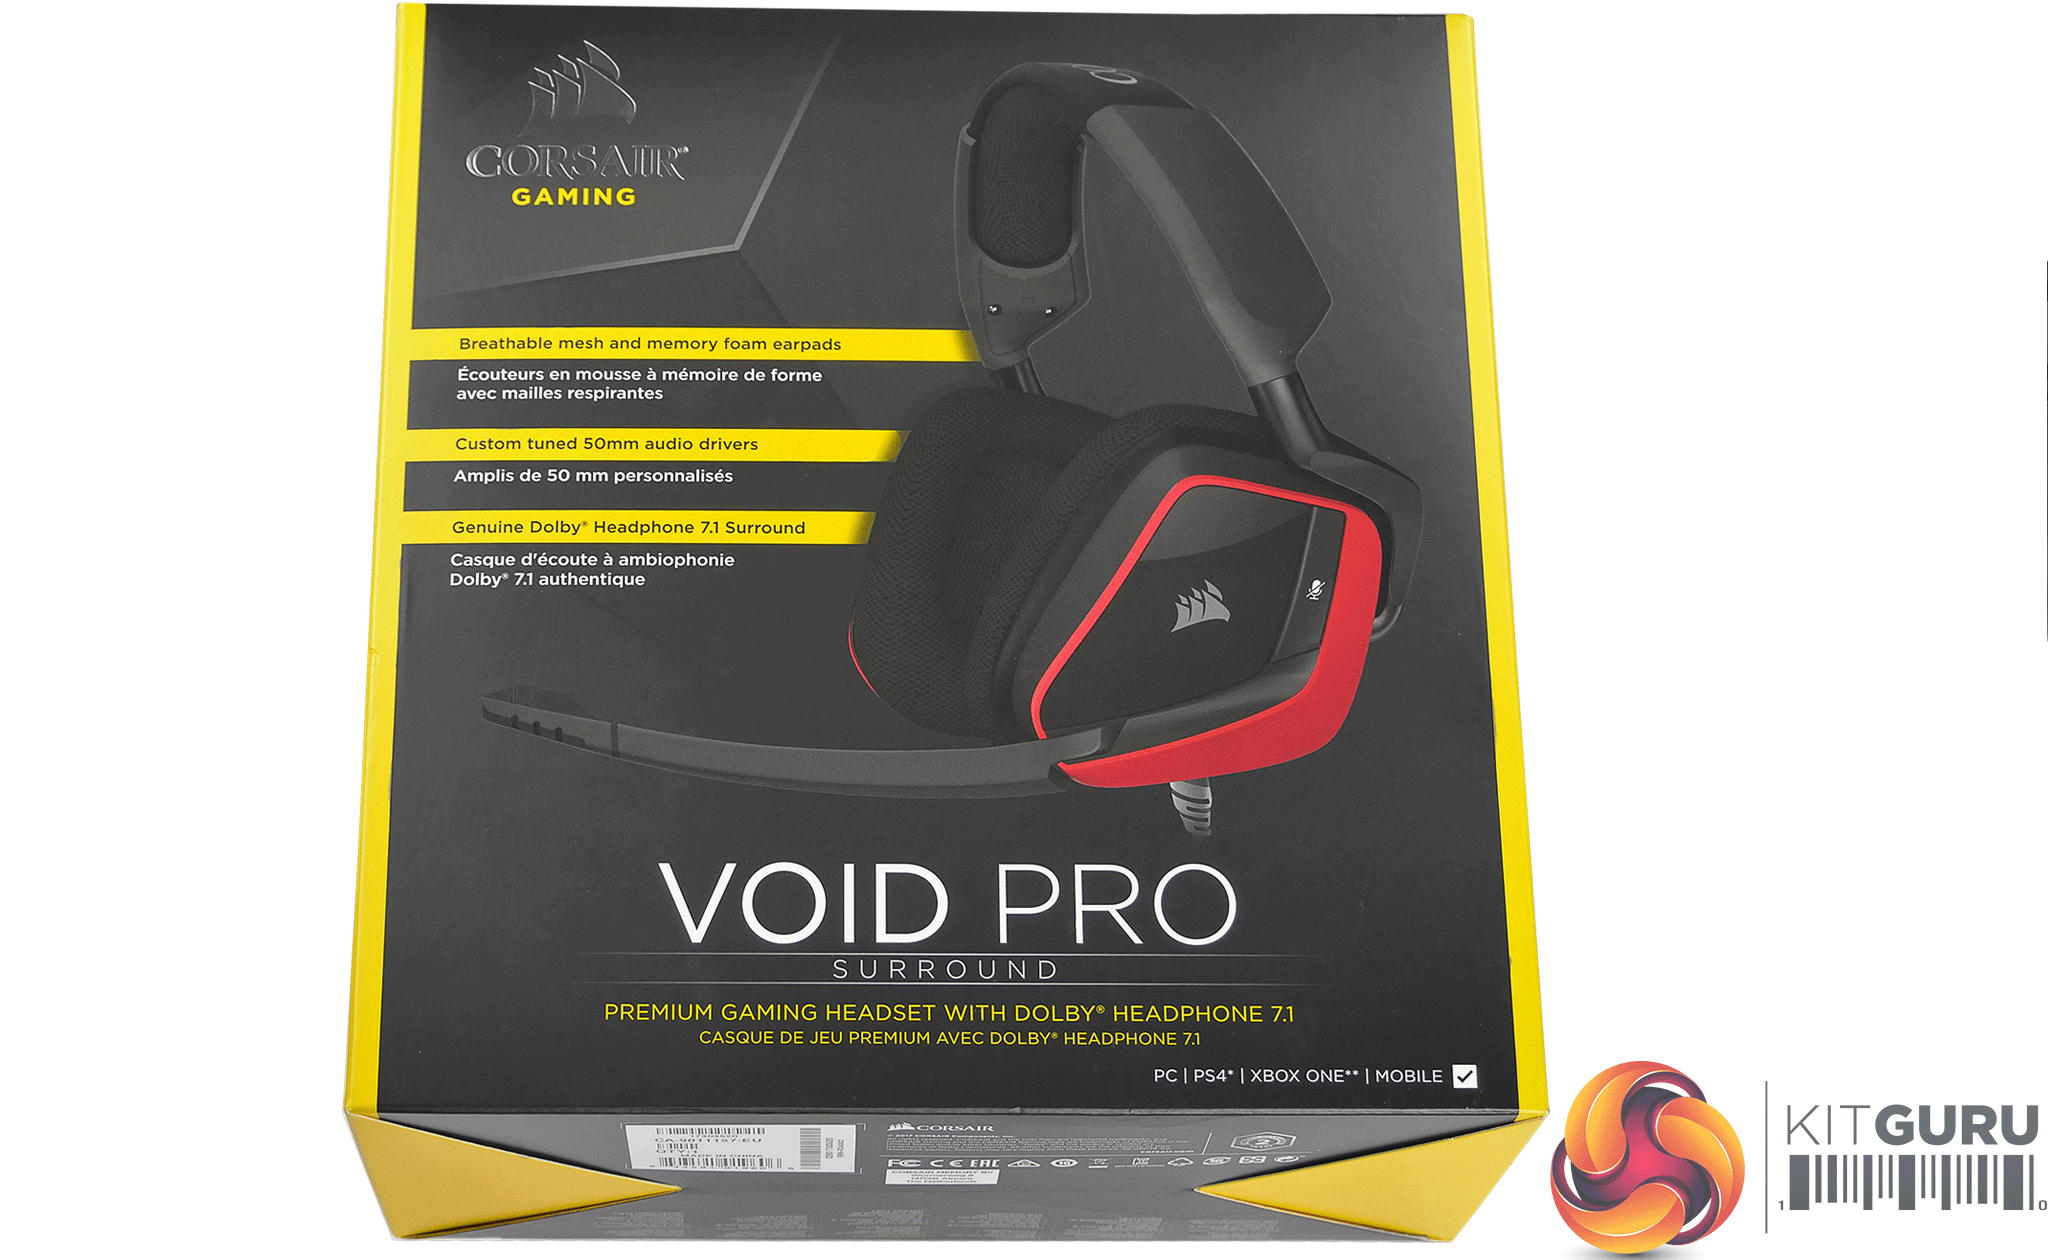 corsair void pro work with xbox one